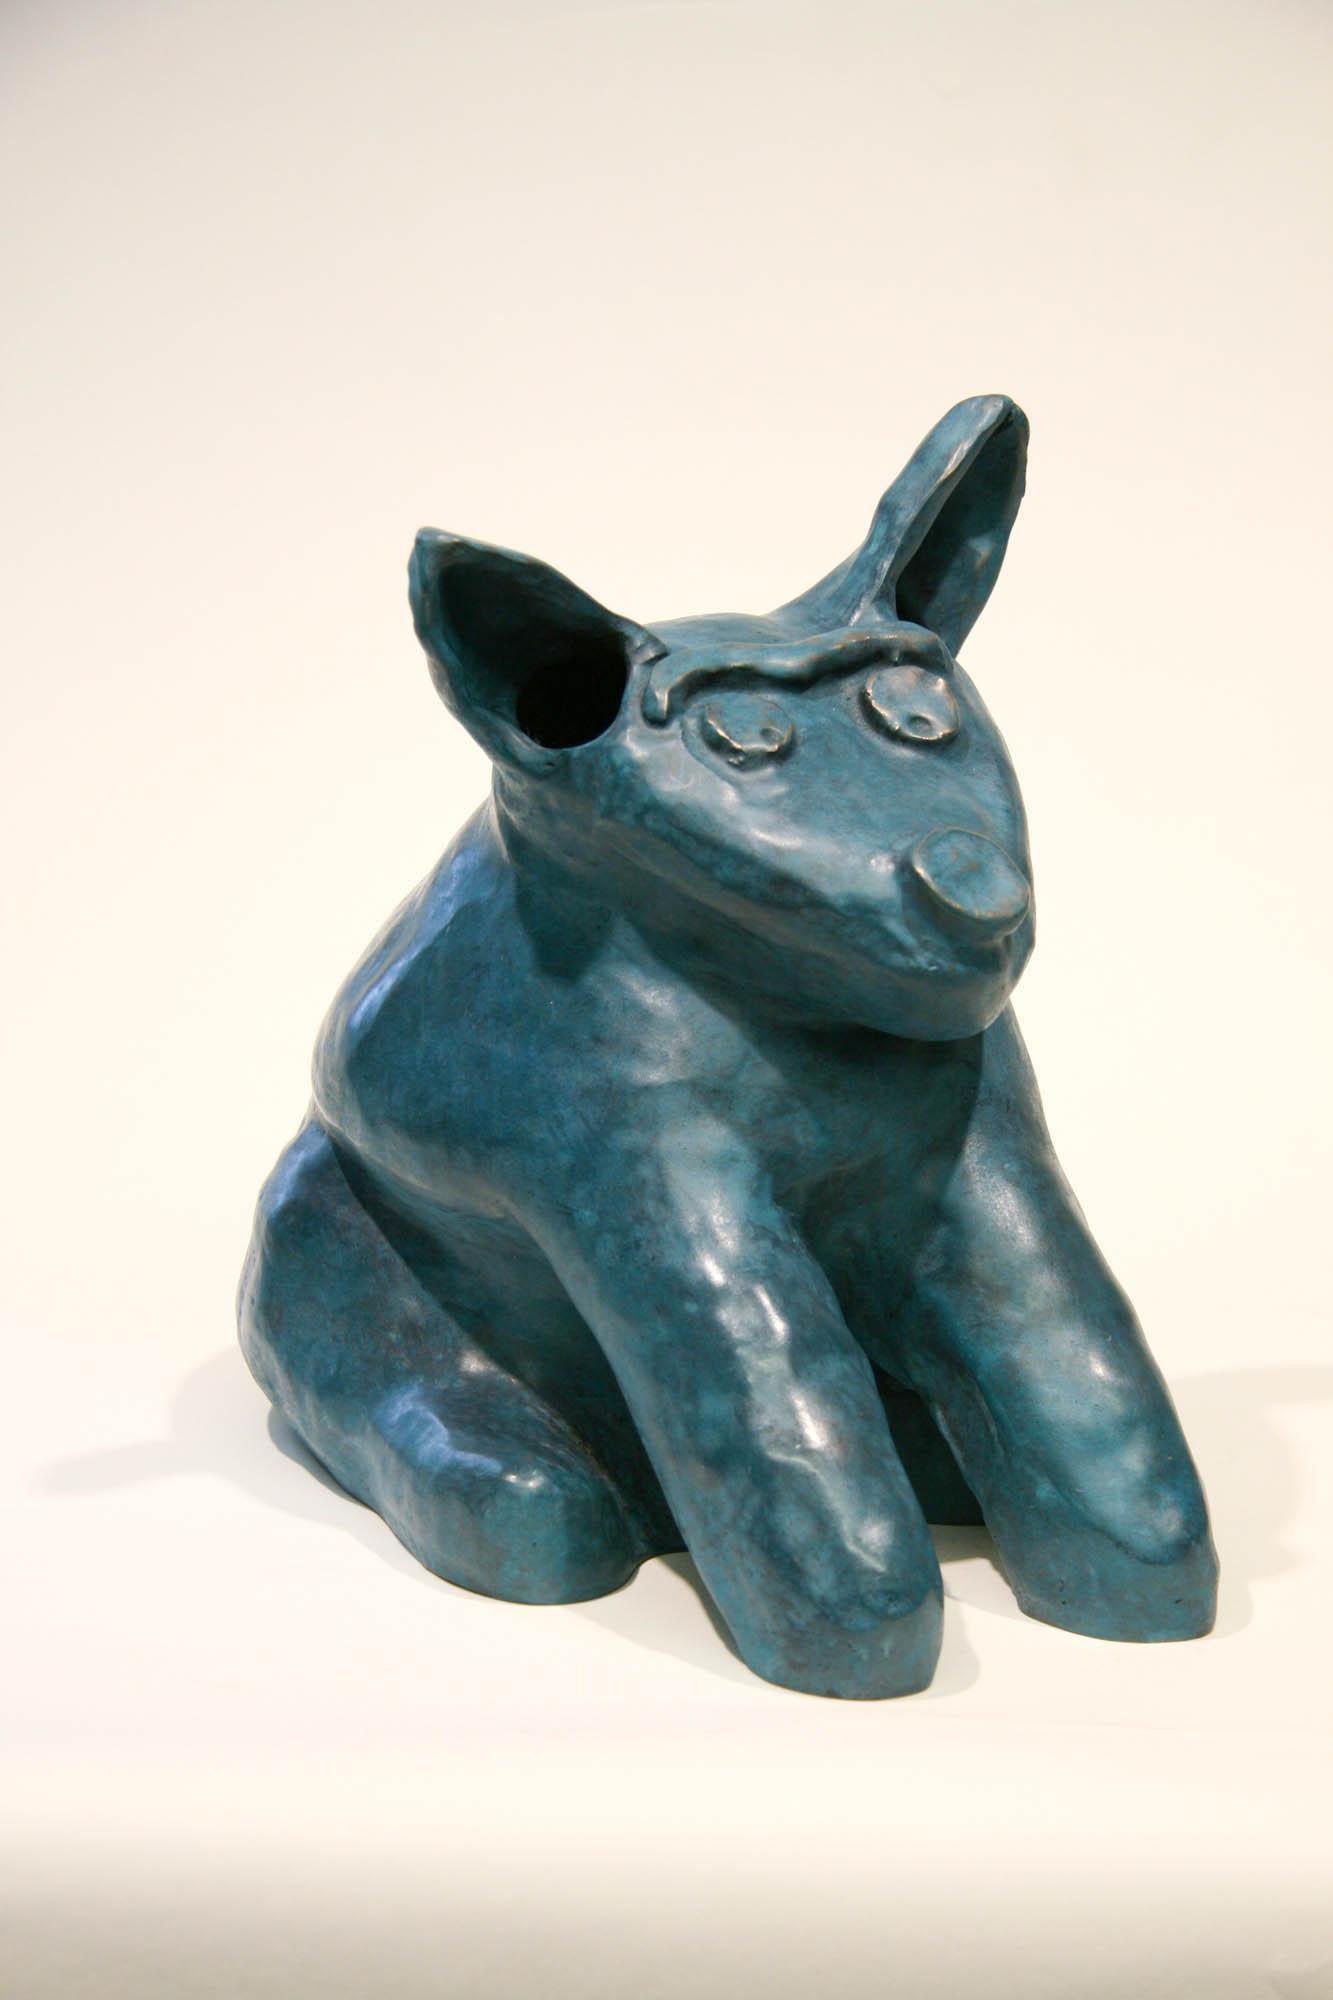 Marvin Tso Likes Green Chile Cheeseburgers, bronze dog sculpture, teal, seated - Sculpture by Melanie Yazzie